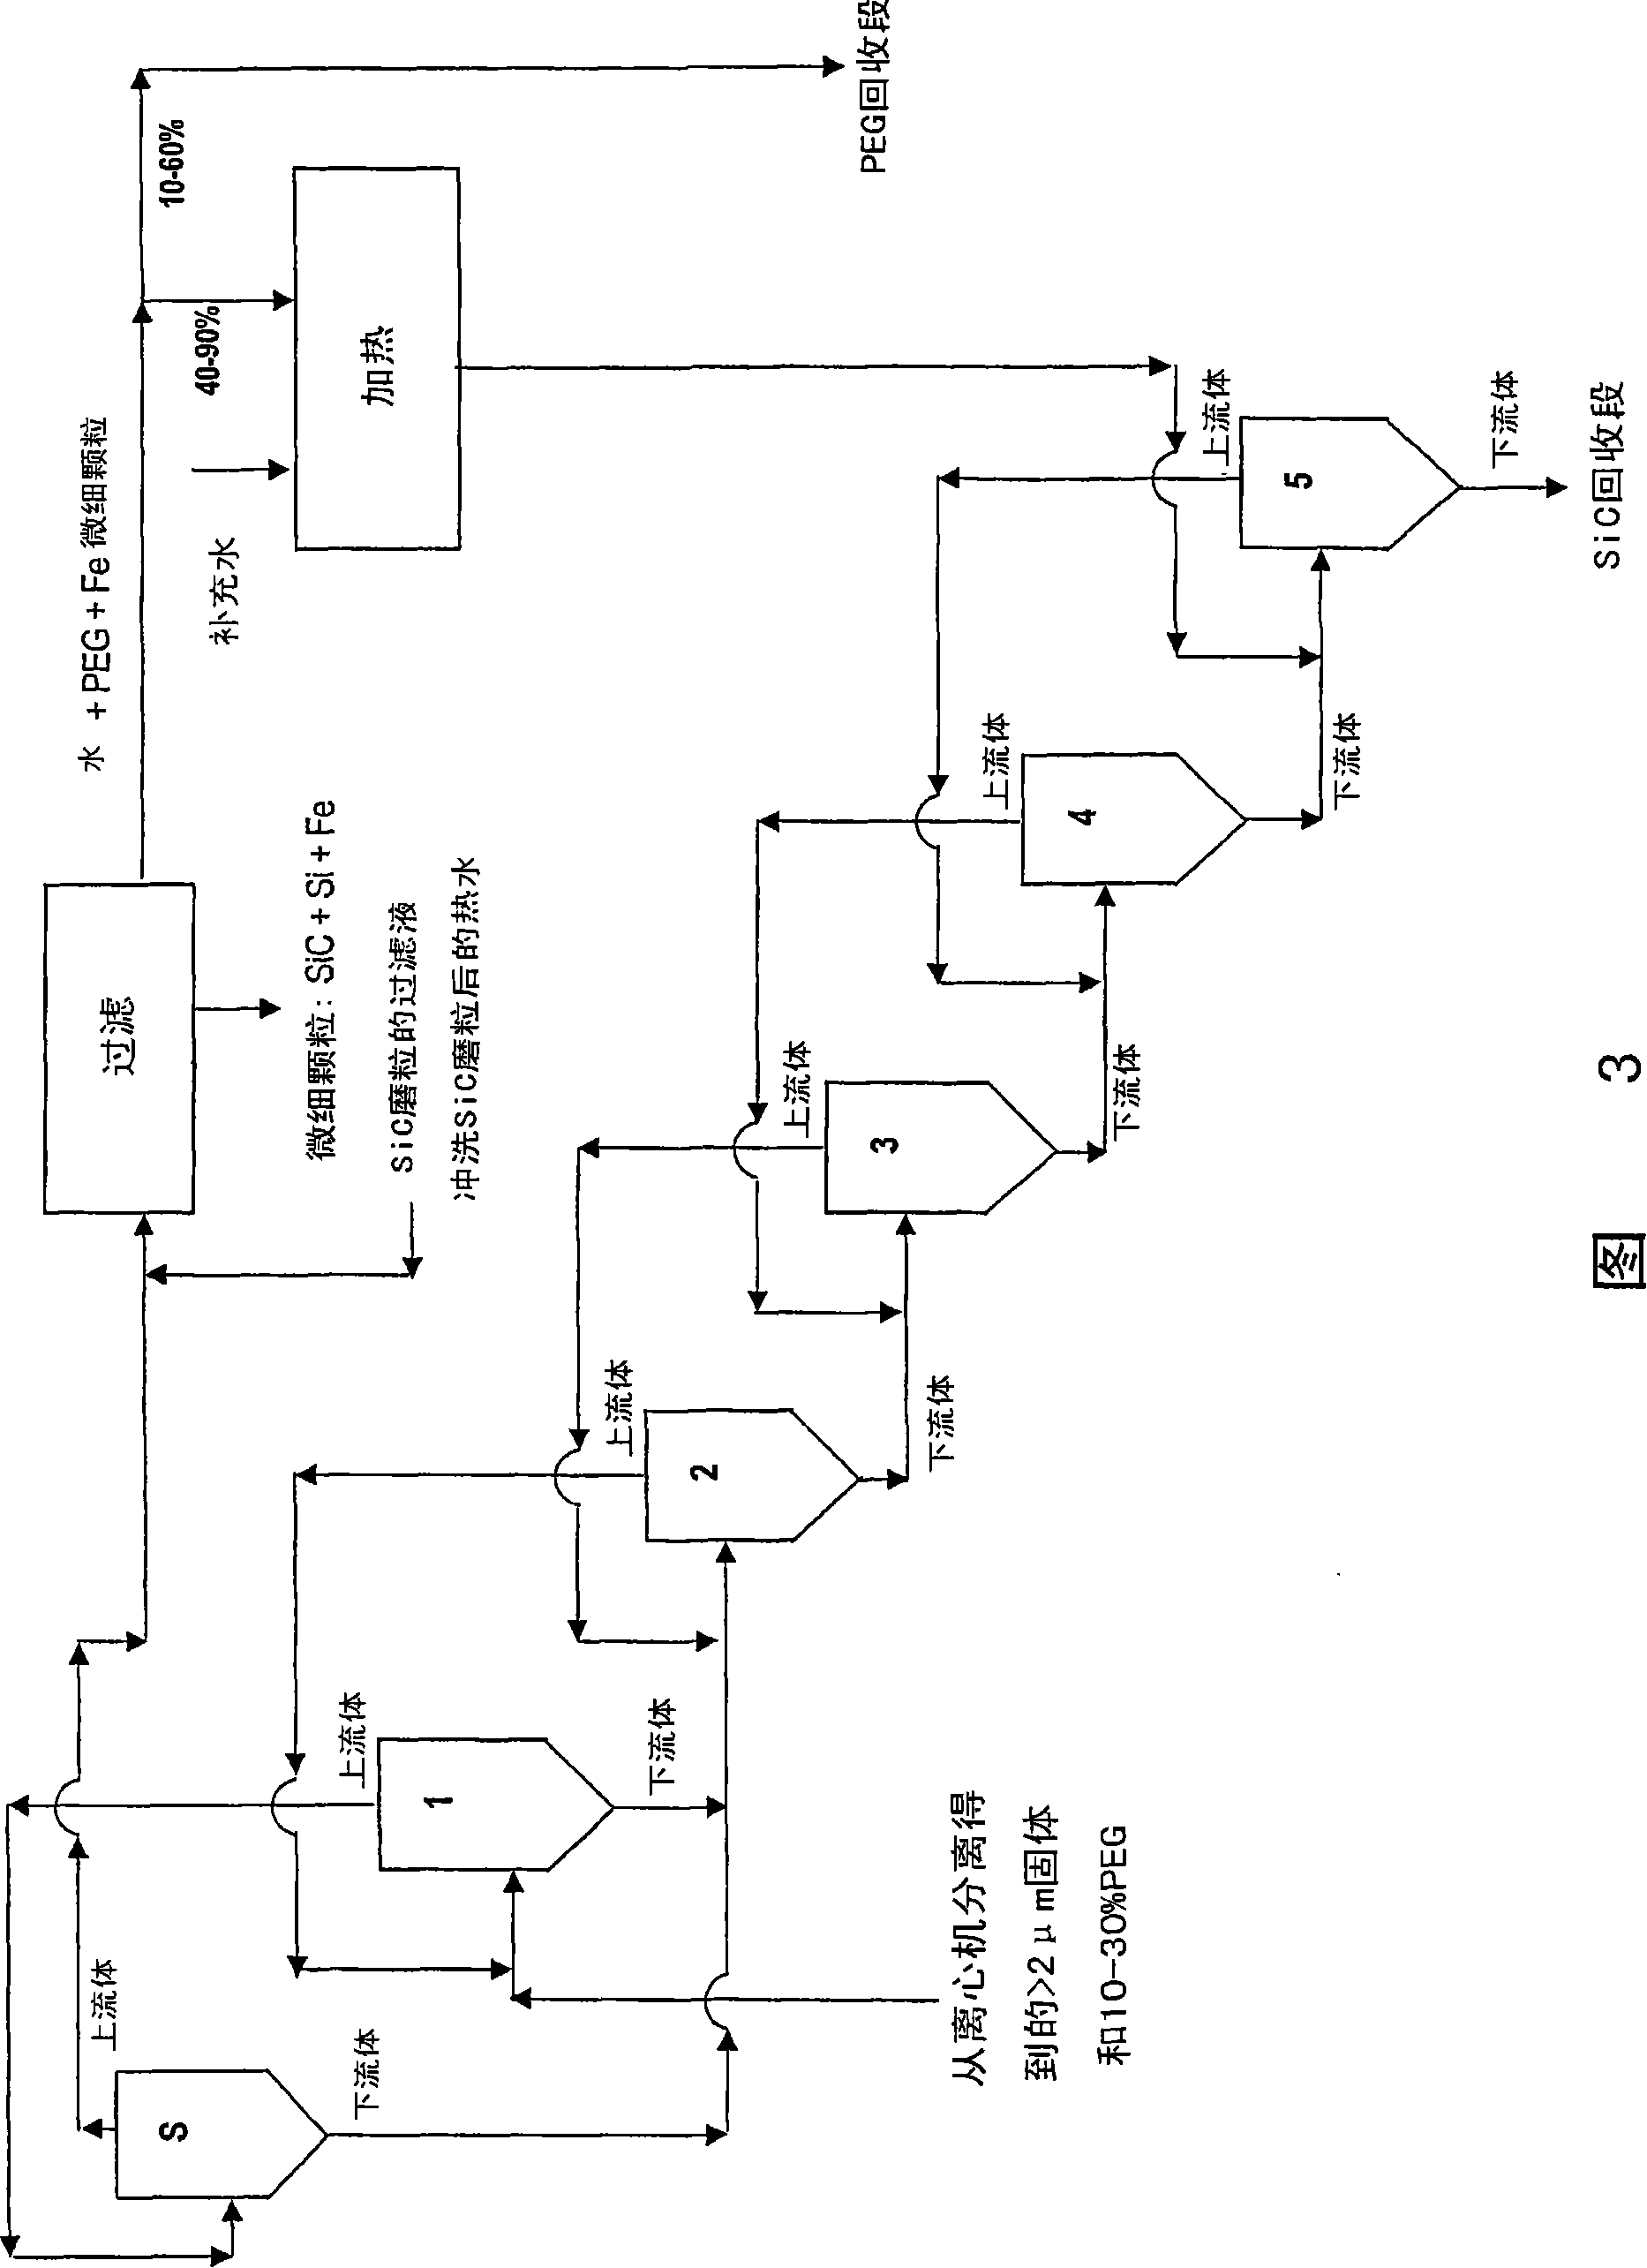 Process and apparatus for treating exhausted abrasive slurries for the recovery of their reusable components